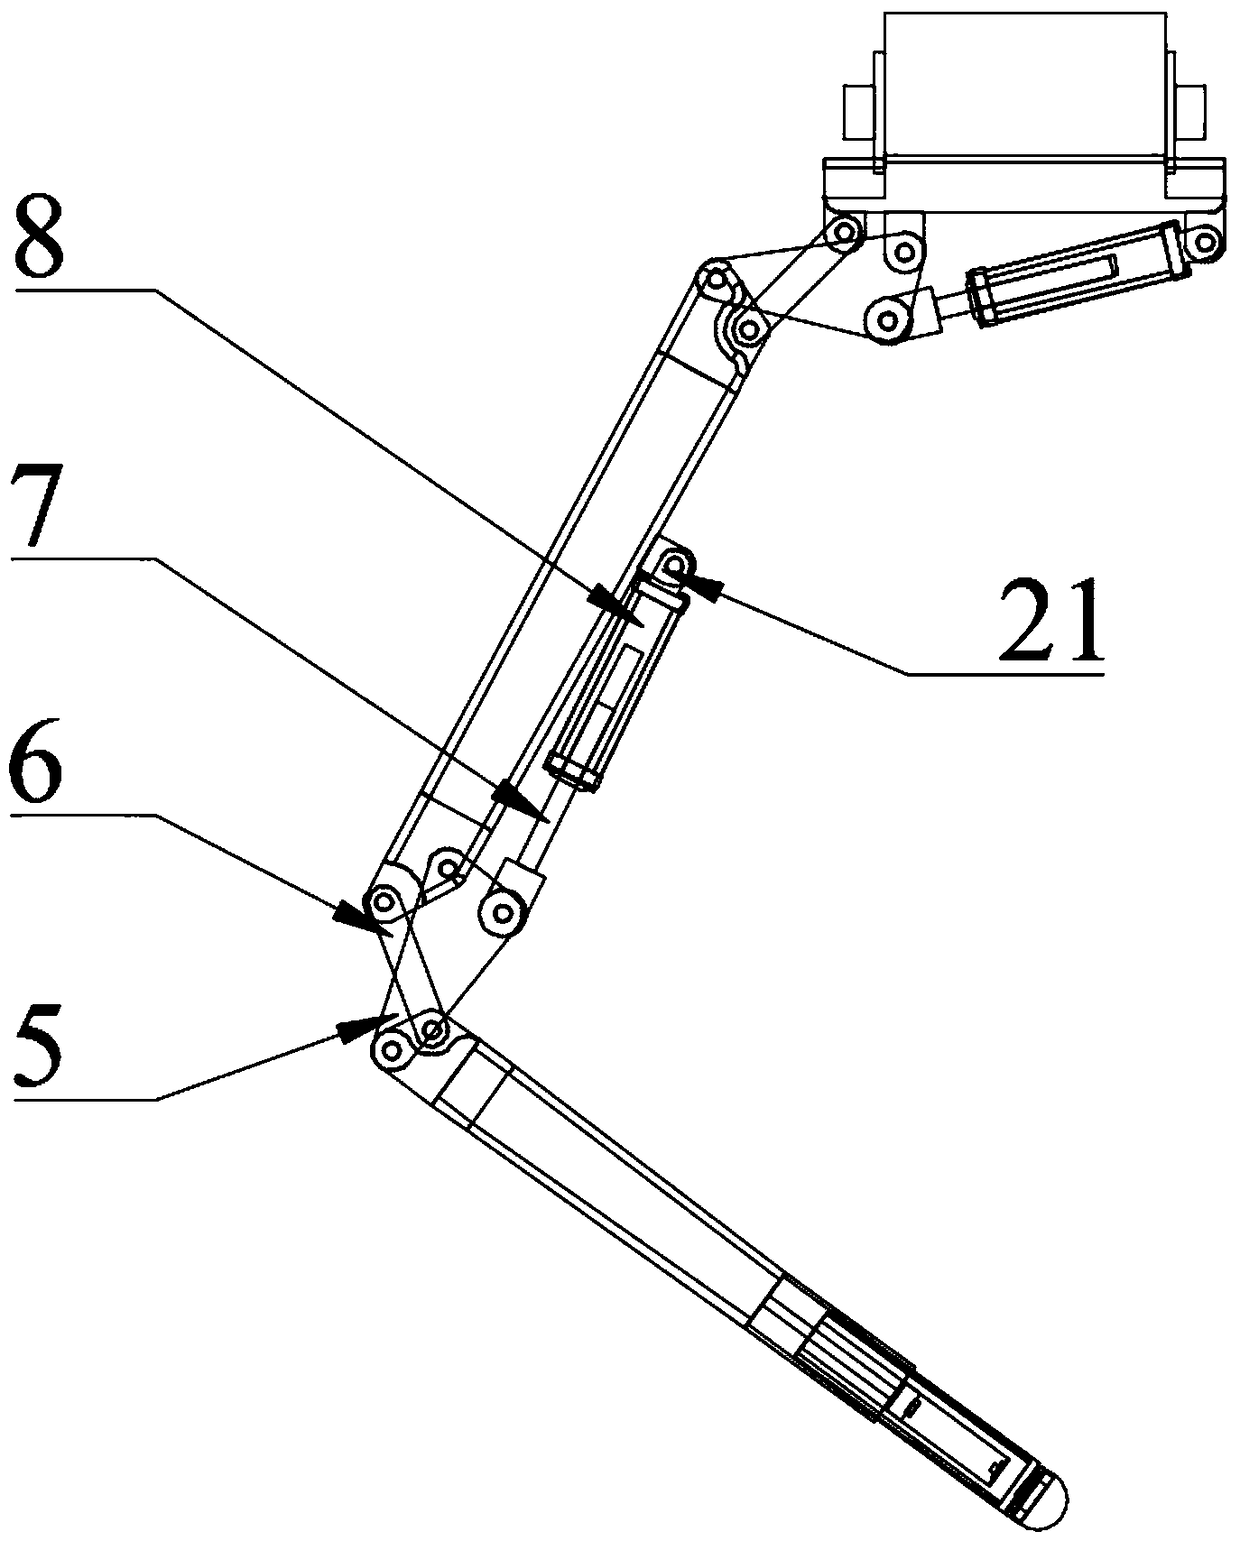 Quadruped robot and leg joint structure